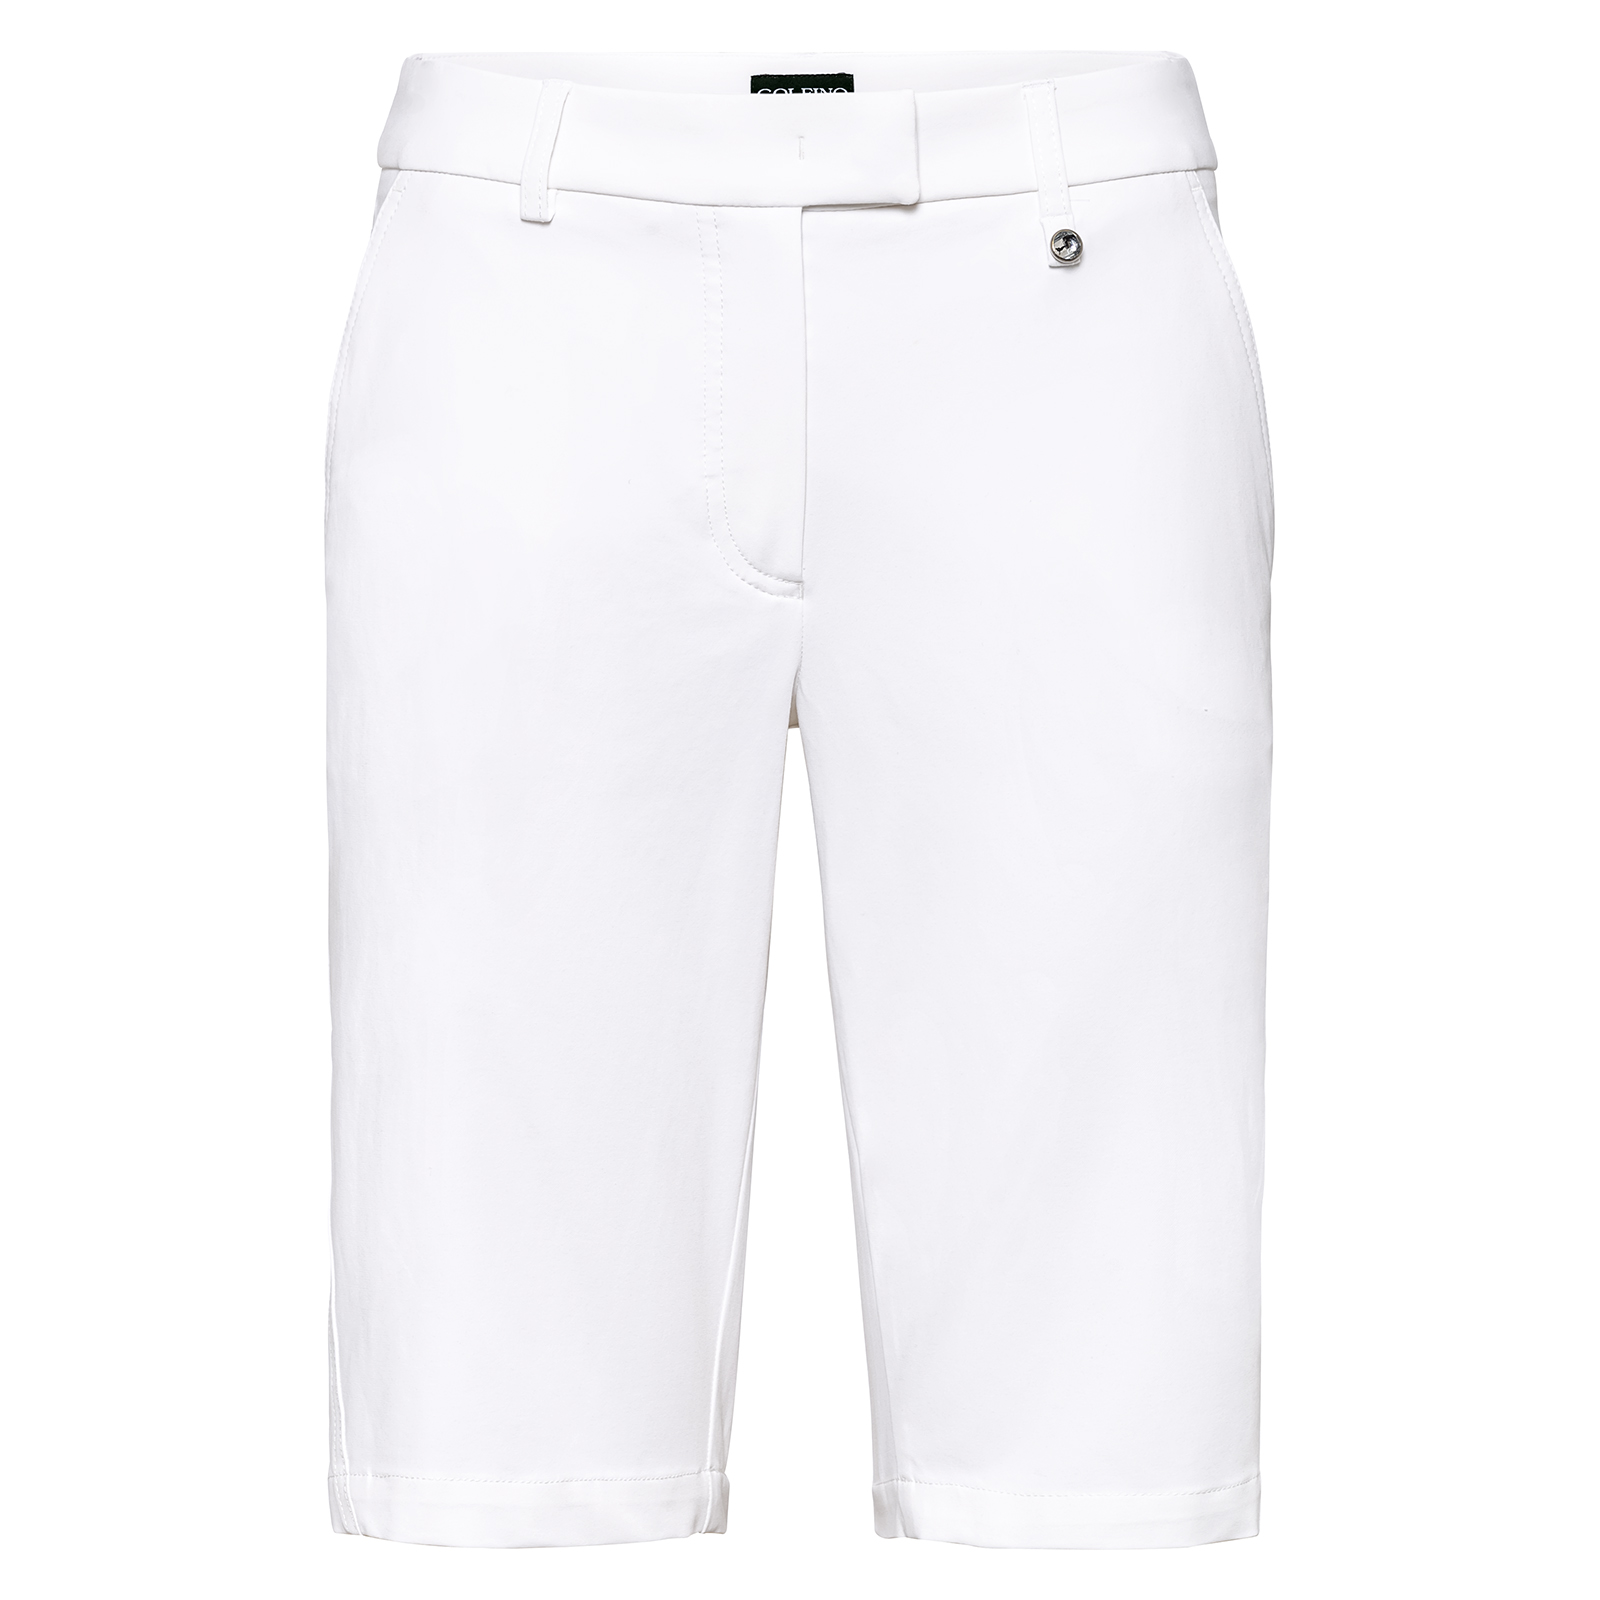 Ladies' Bermuda golf shorts with stretch component